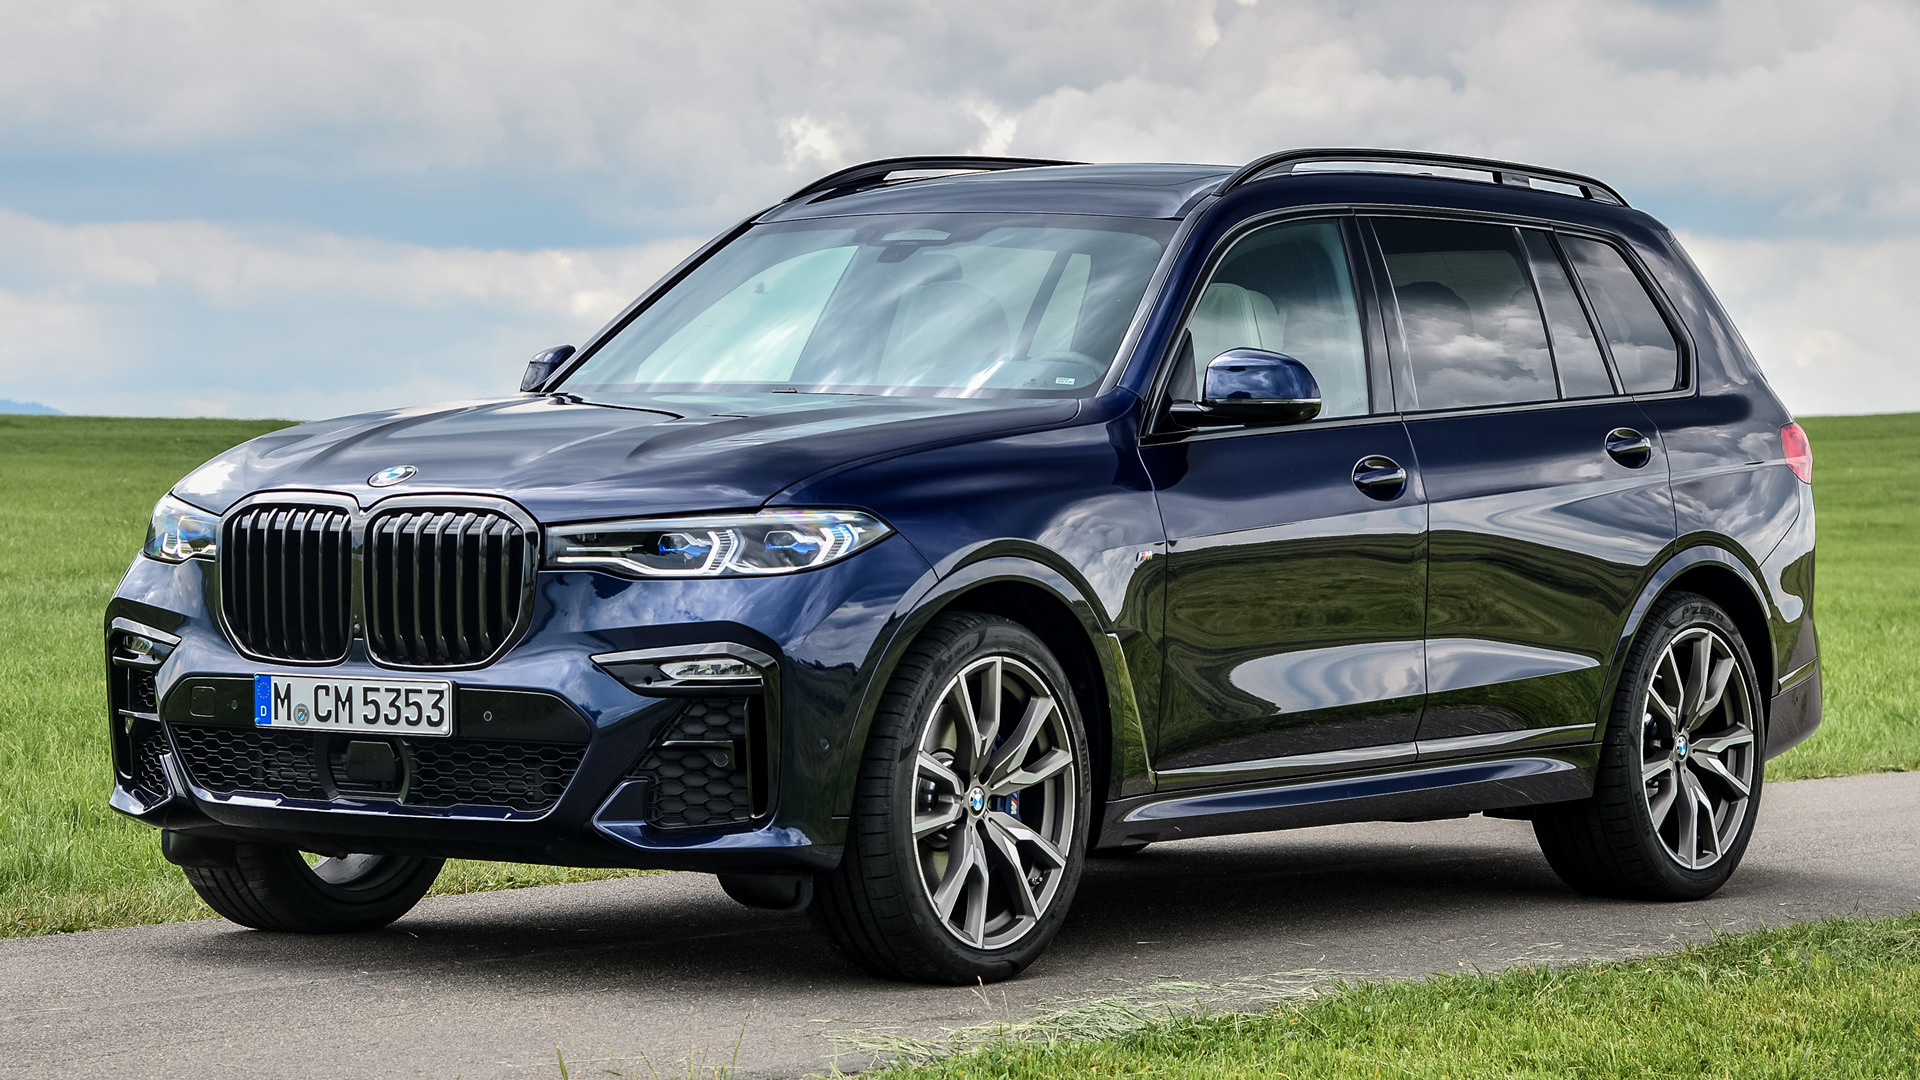 2019 BMW X7 M50i - Wallpapers and HD Images | Car Pixel